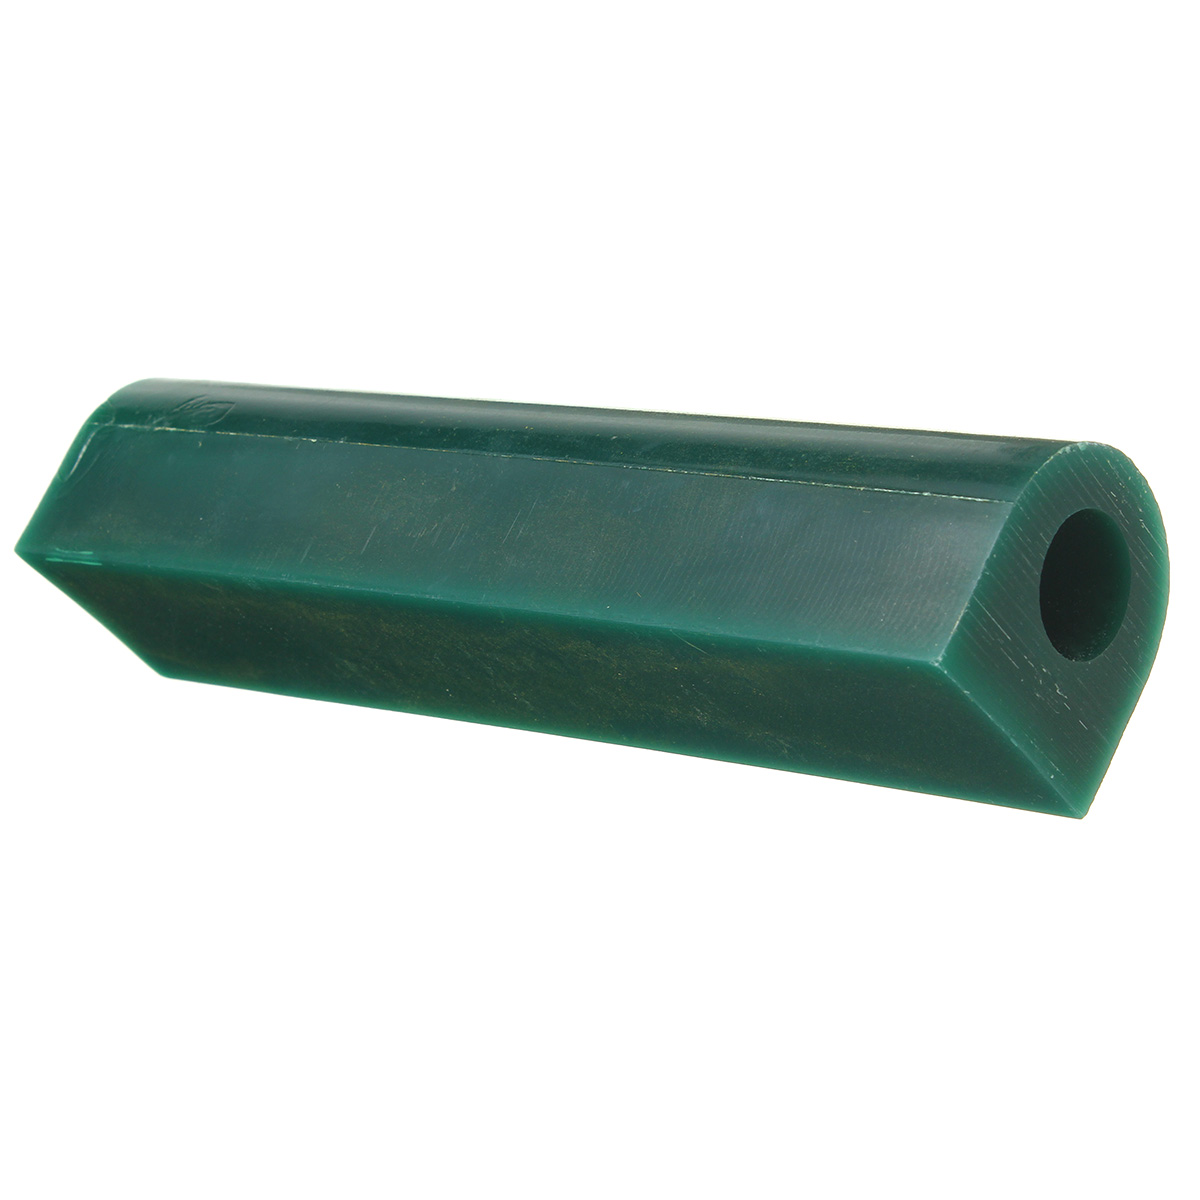 Green-Wax-Ring-Mould-Tube-Carving-Flat-Top-Jewellery-Making-Jewelers-Tool-T200-1406000